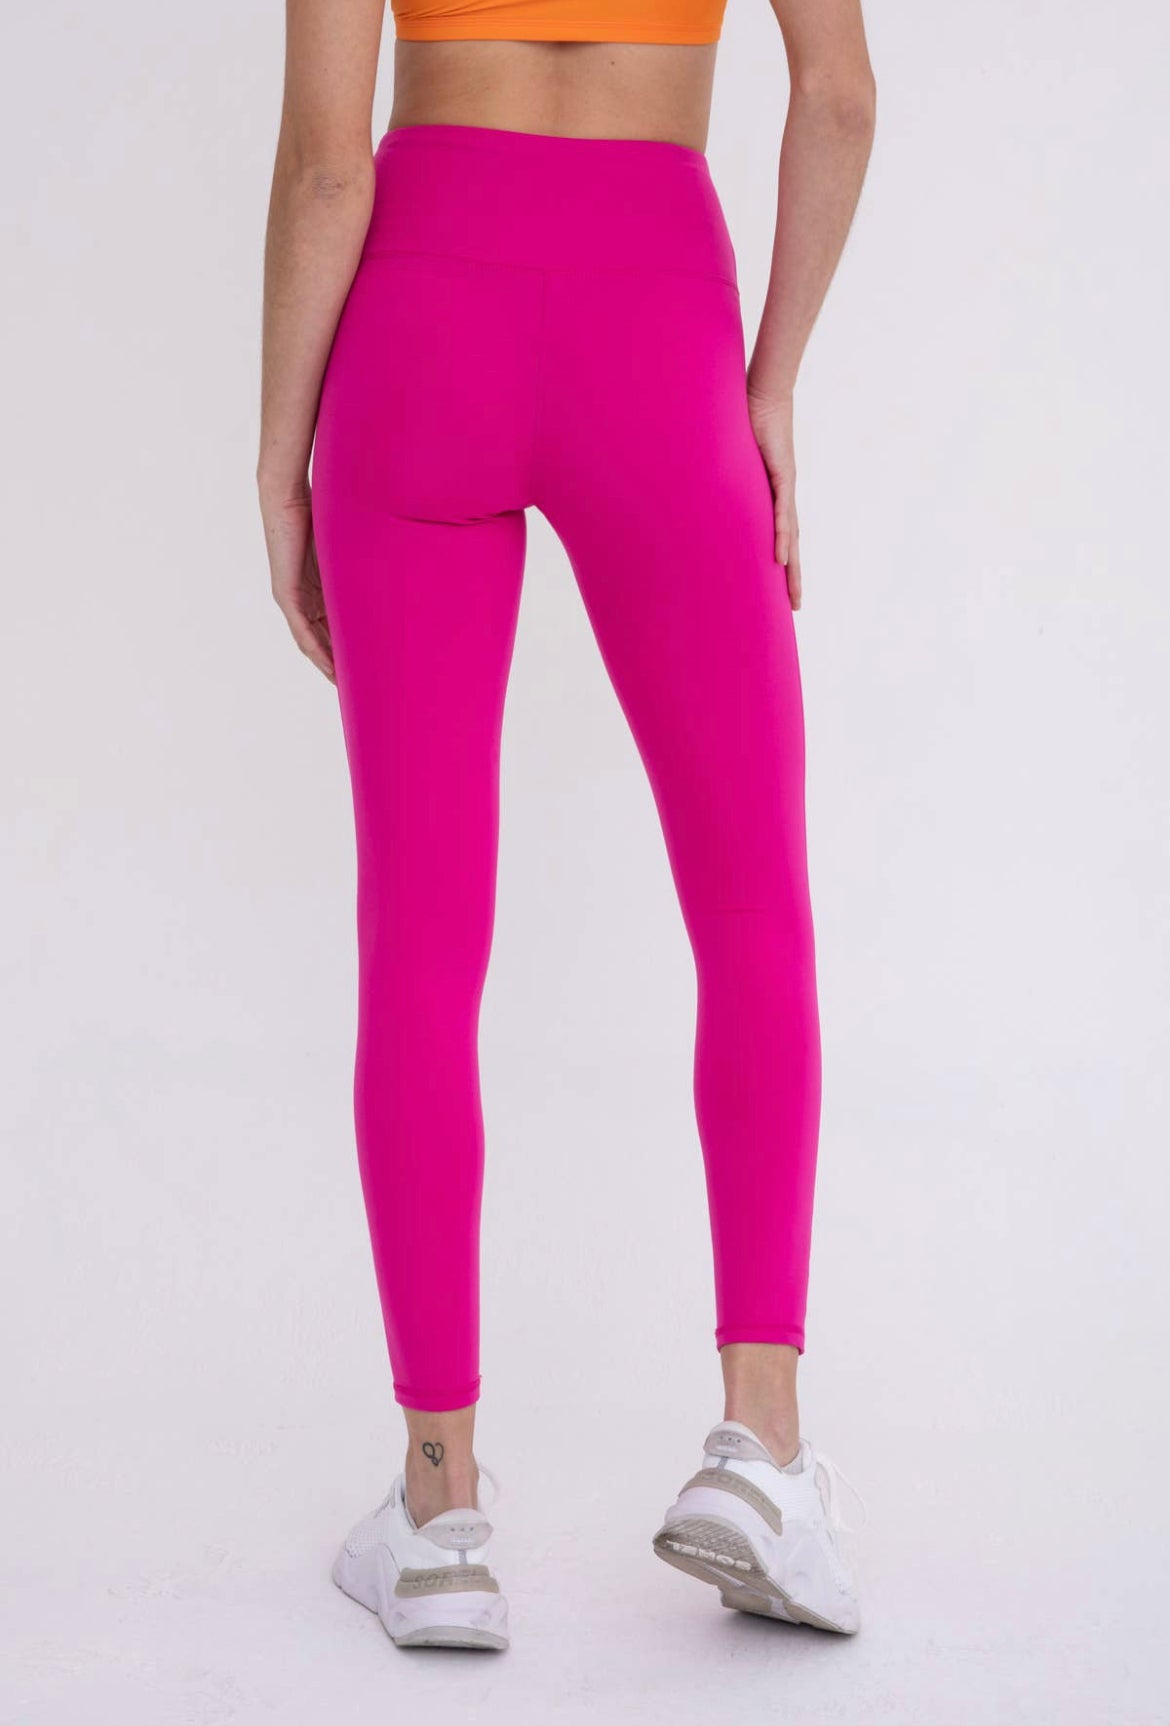 Pink Boutique - The HOTTEST leggings you have ever seen